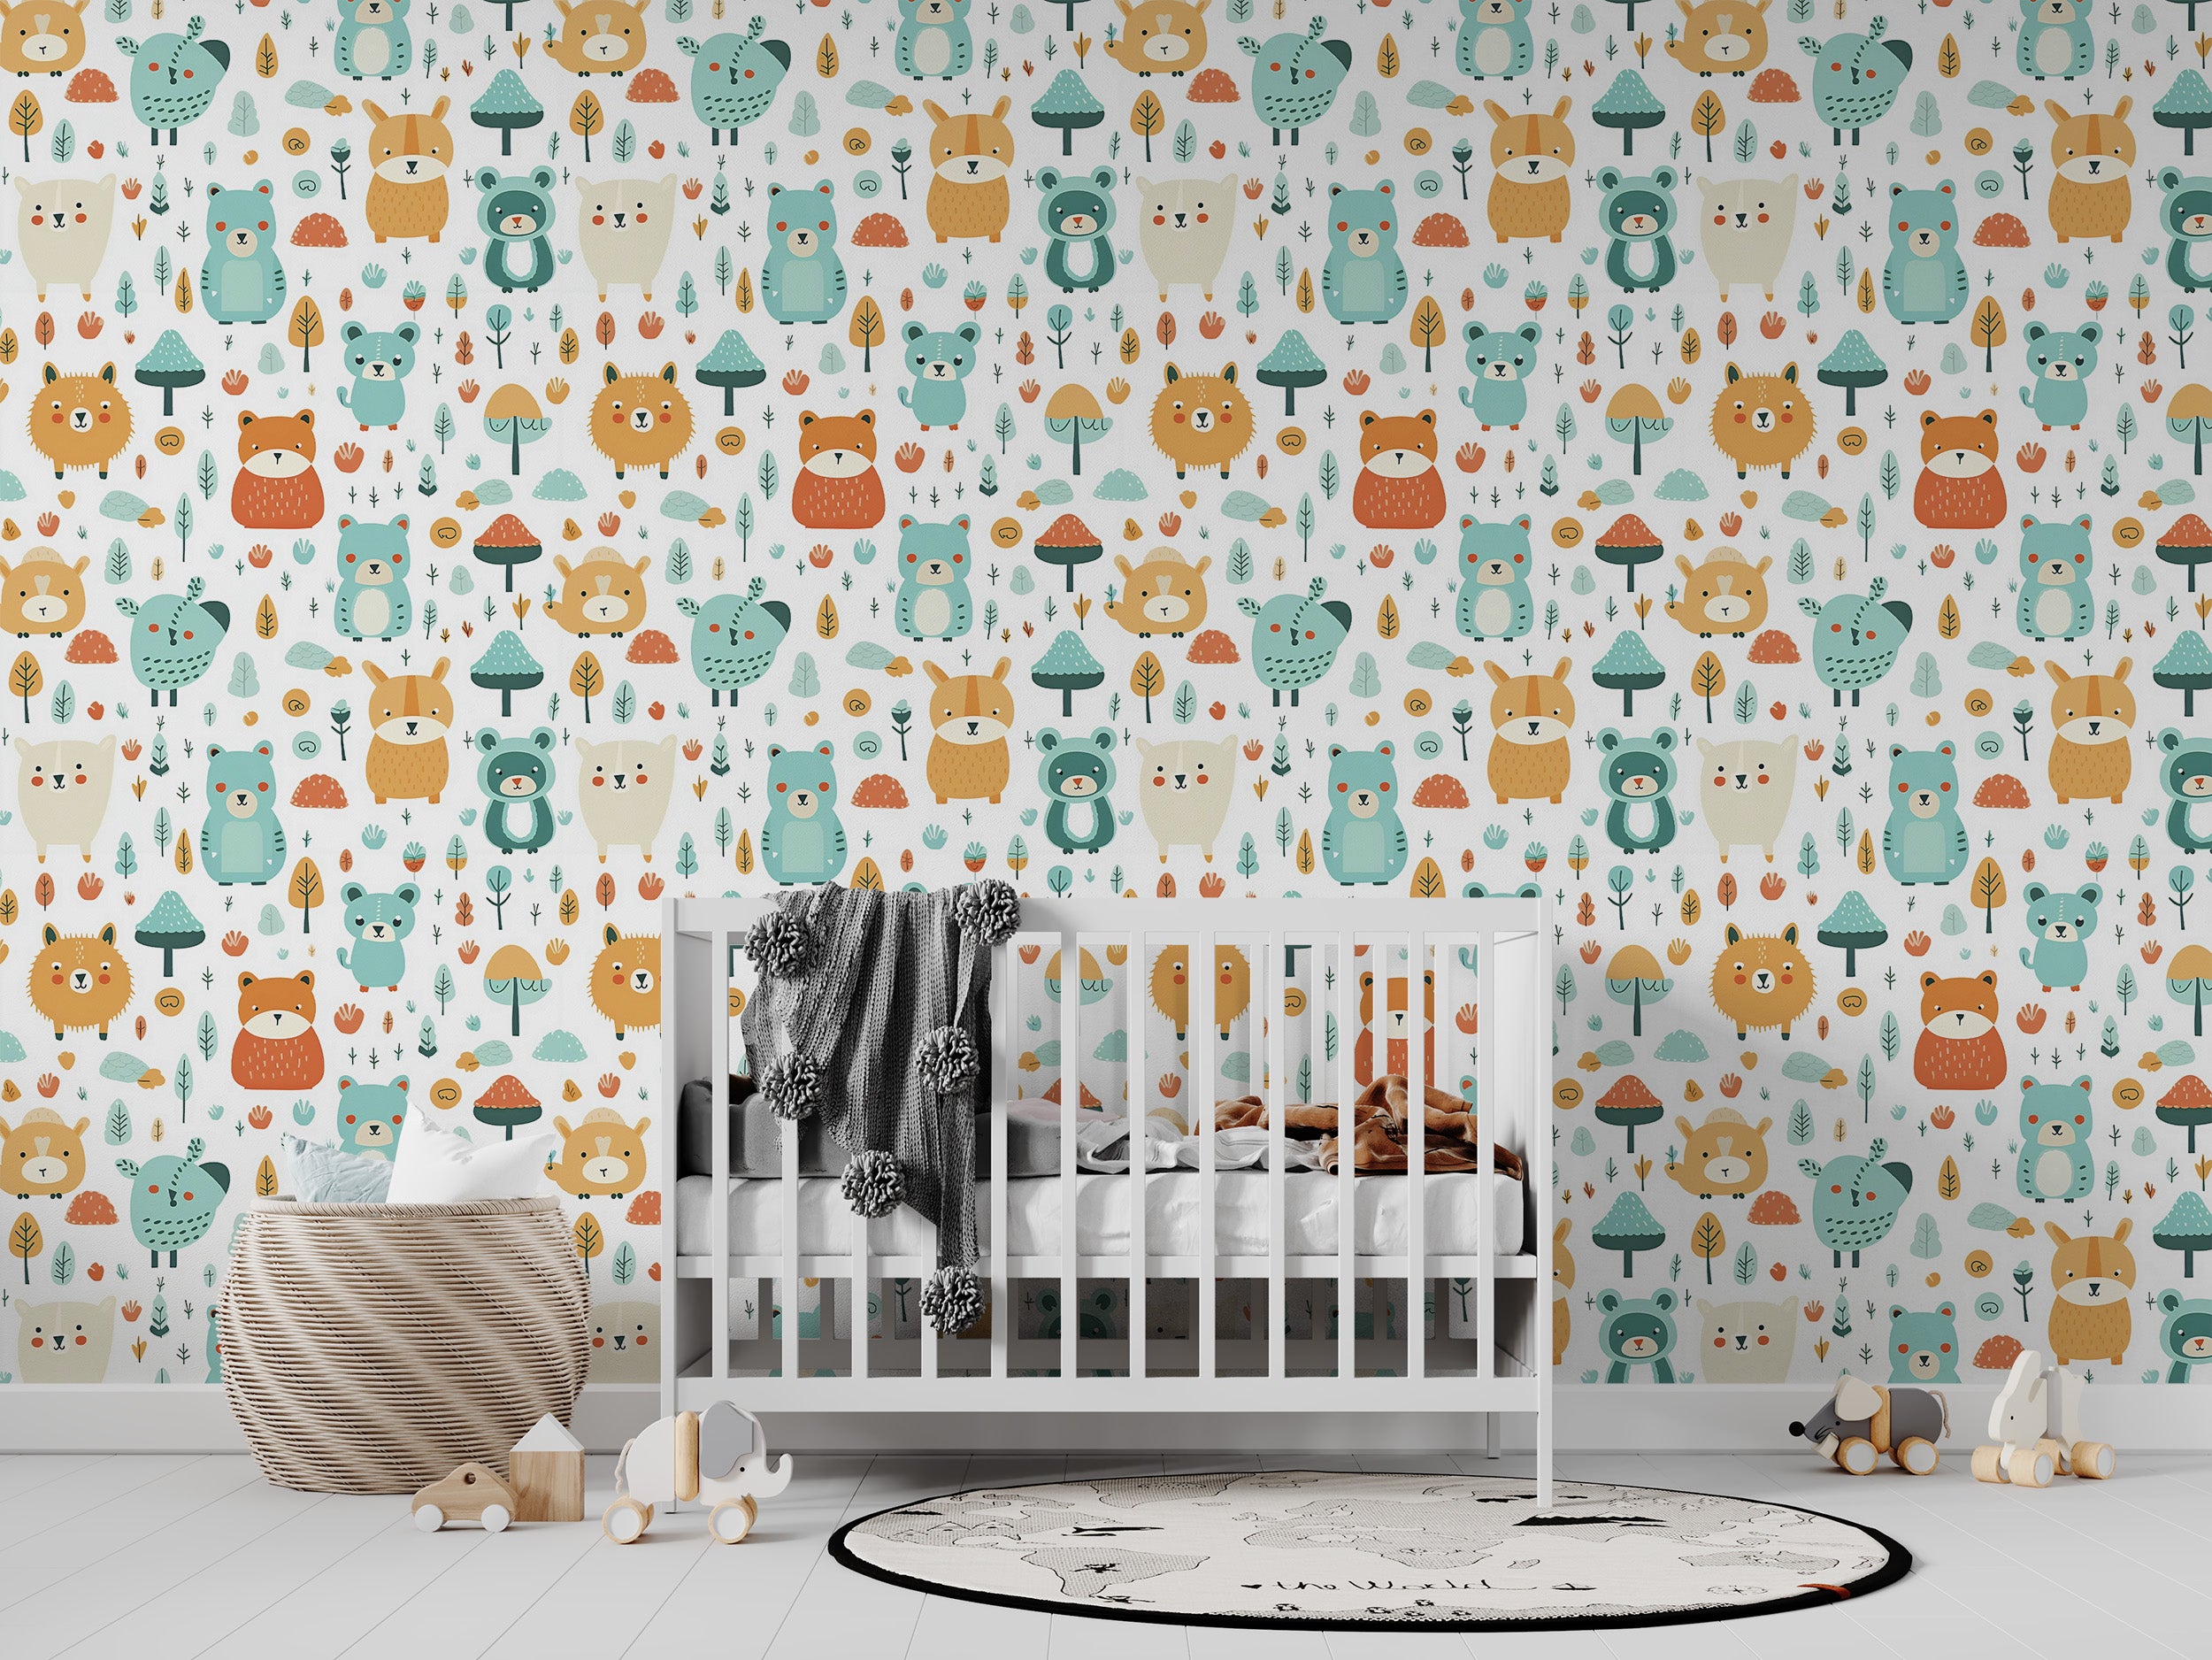 Colorful Kids Room Wall Decal with Playful Motifs